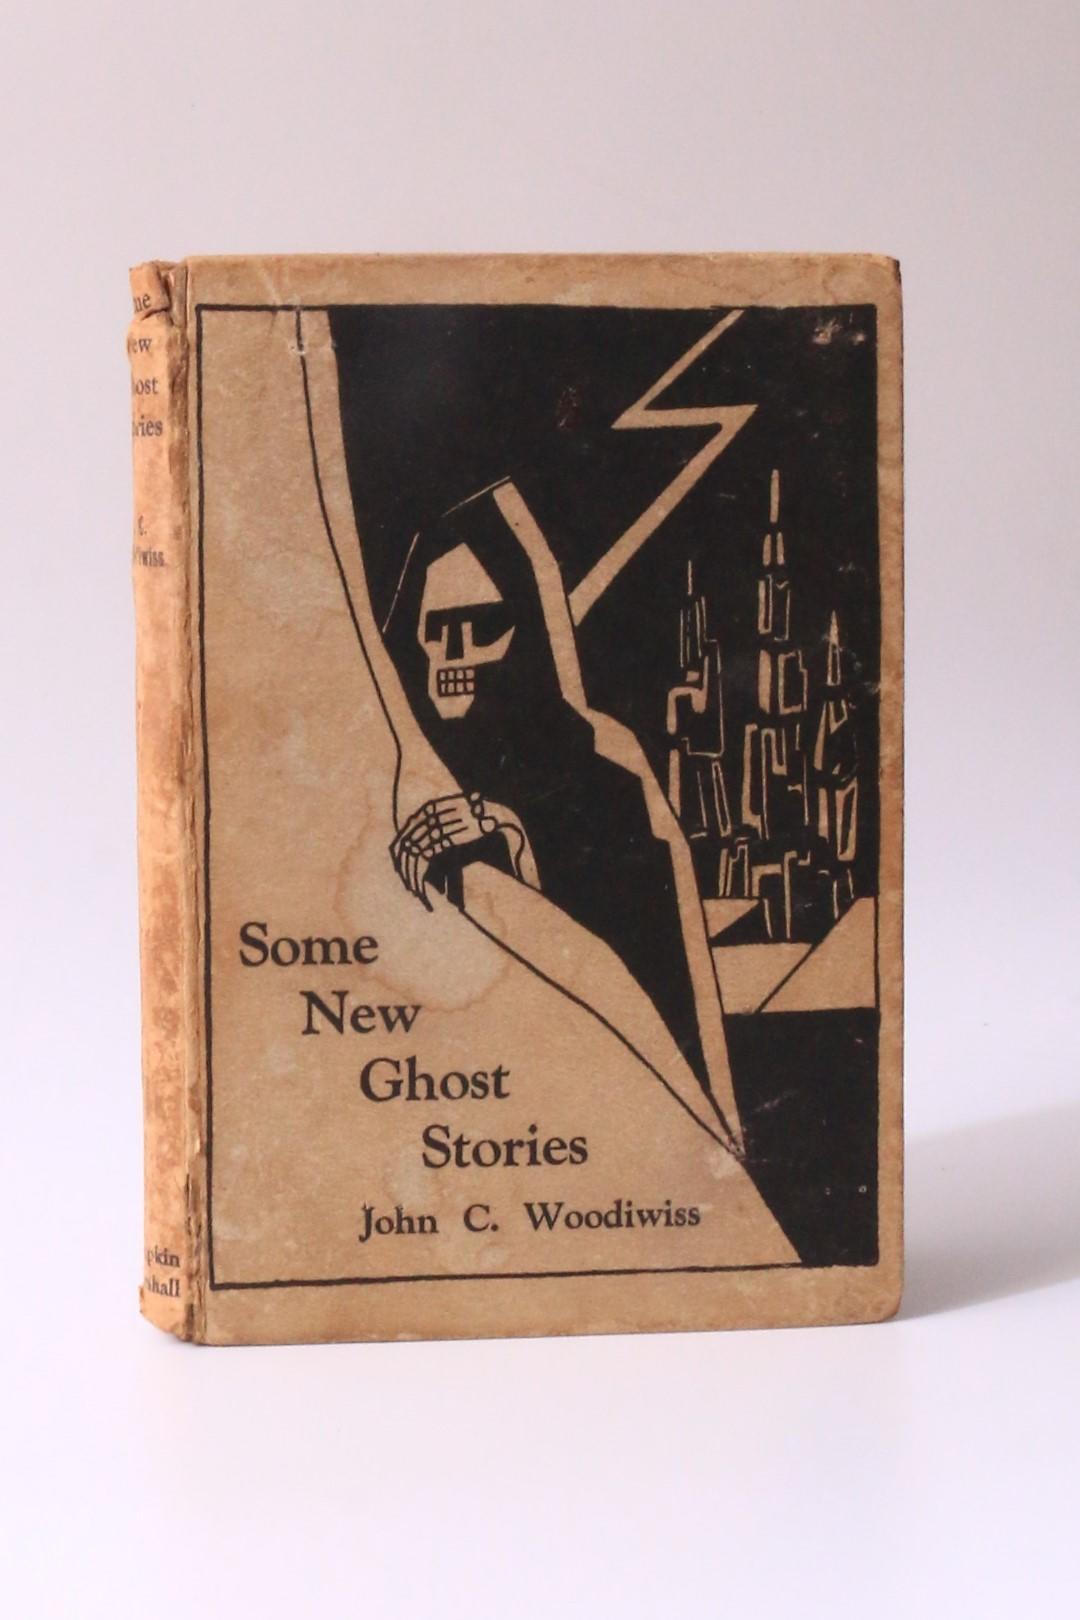 John C. Woodiwiss - Some New Ghost Stories - Simpkin, Marshall, 1931, First Edition.